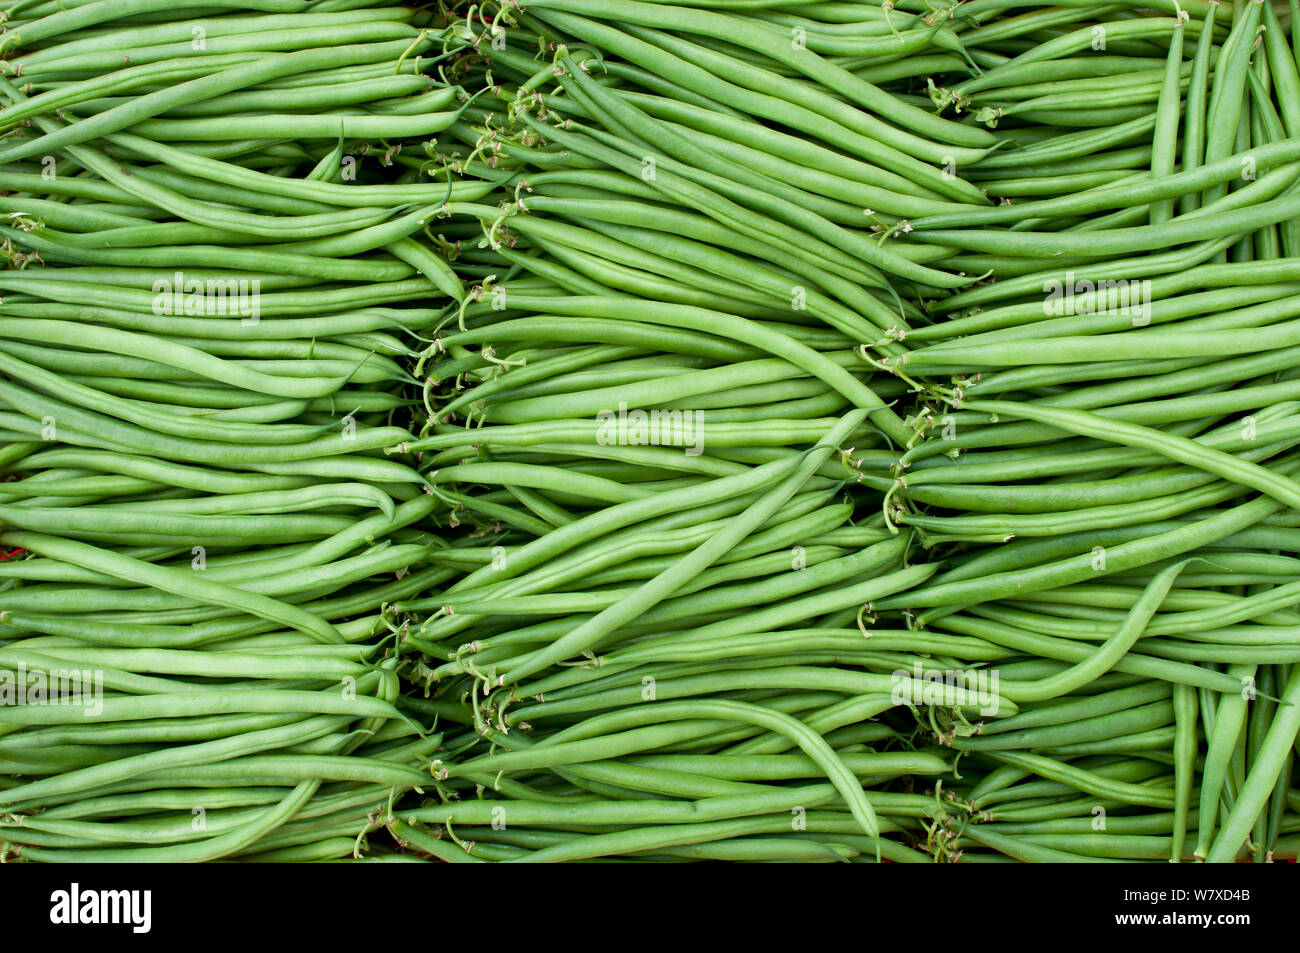 Harvested Green beans (Phaseolus vulgaris) on commercial farm, Tanzania, East Africa. Stock Photo